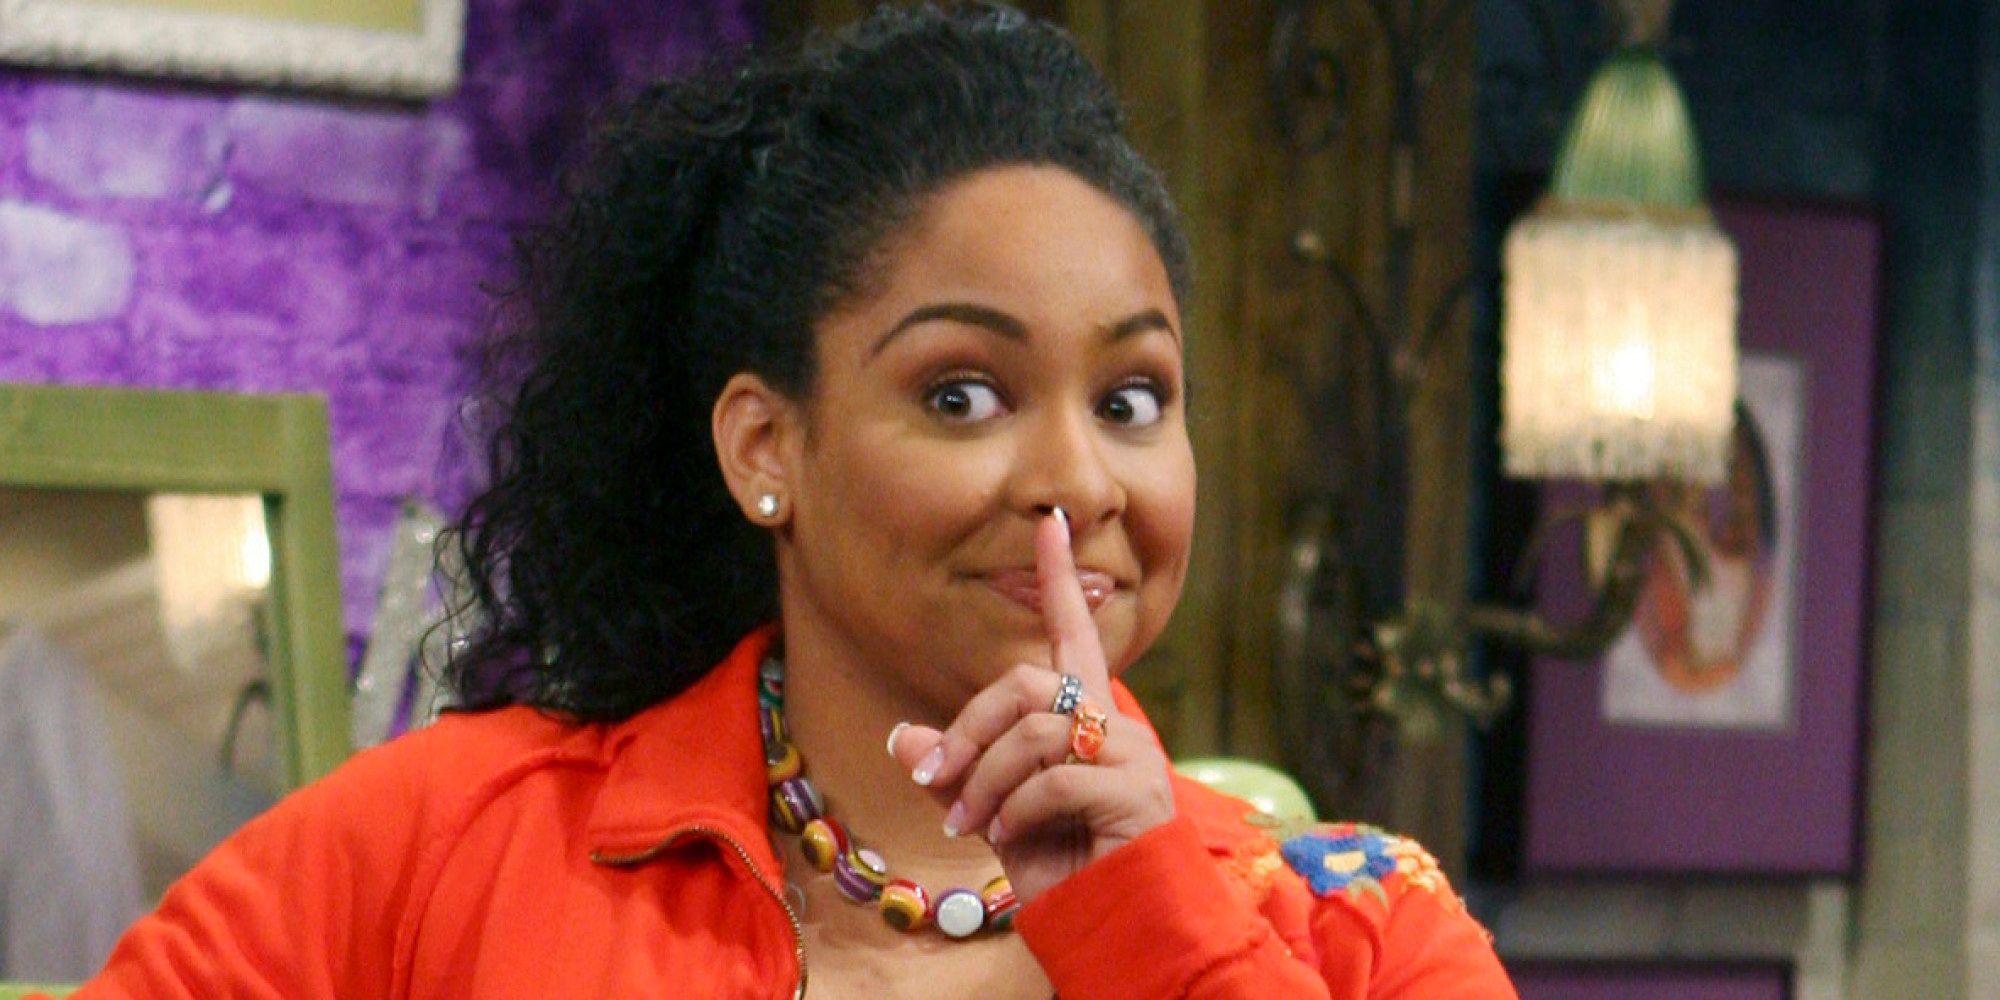 That's So Raven with Raven Baxter-Raven and her secret of seeing the future.